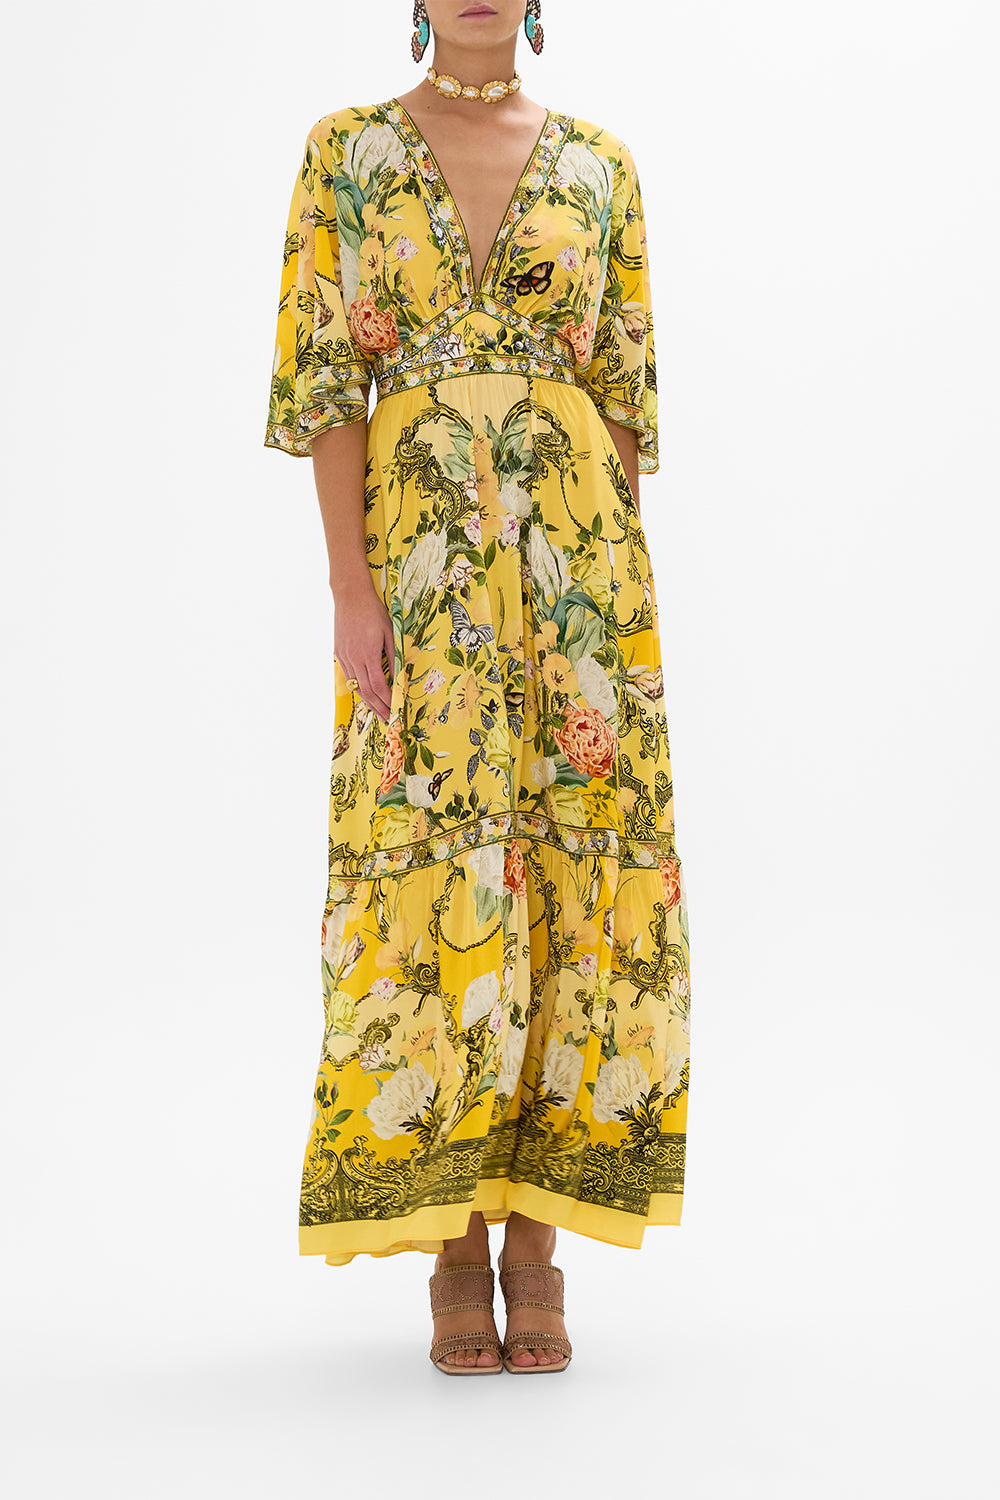 CAMILLA ruffle dress in Paths Of Gold print